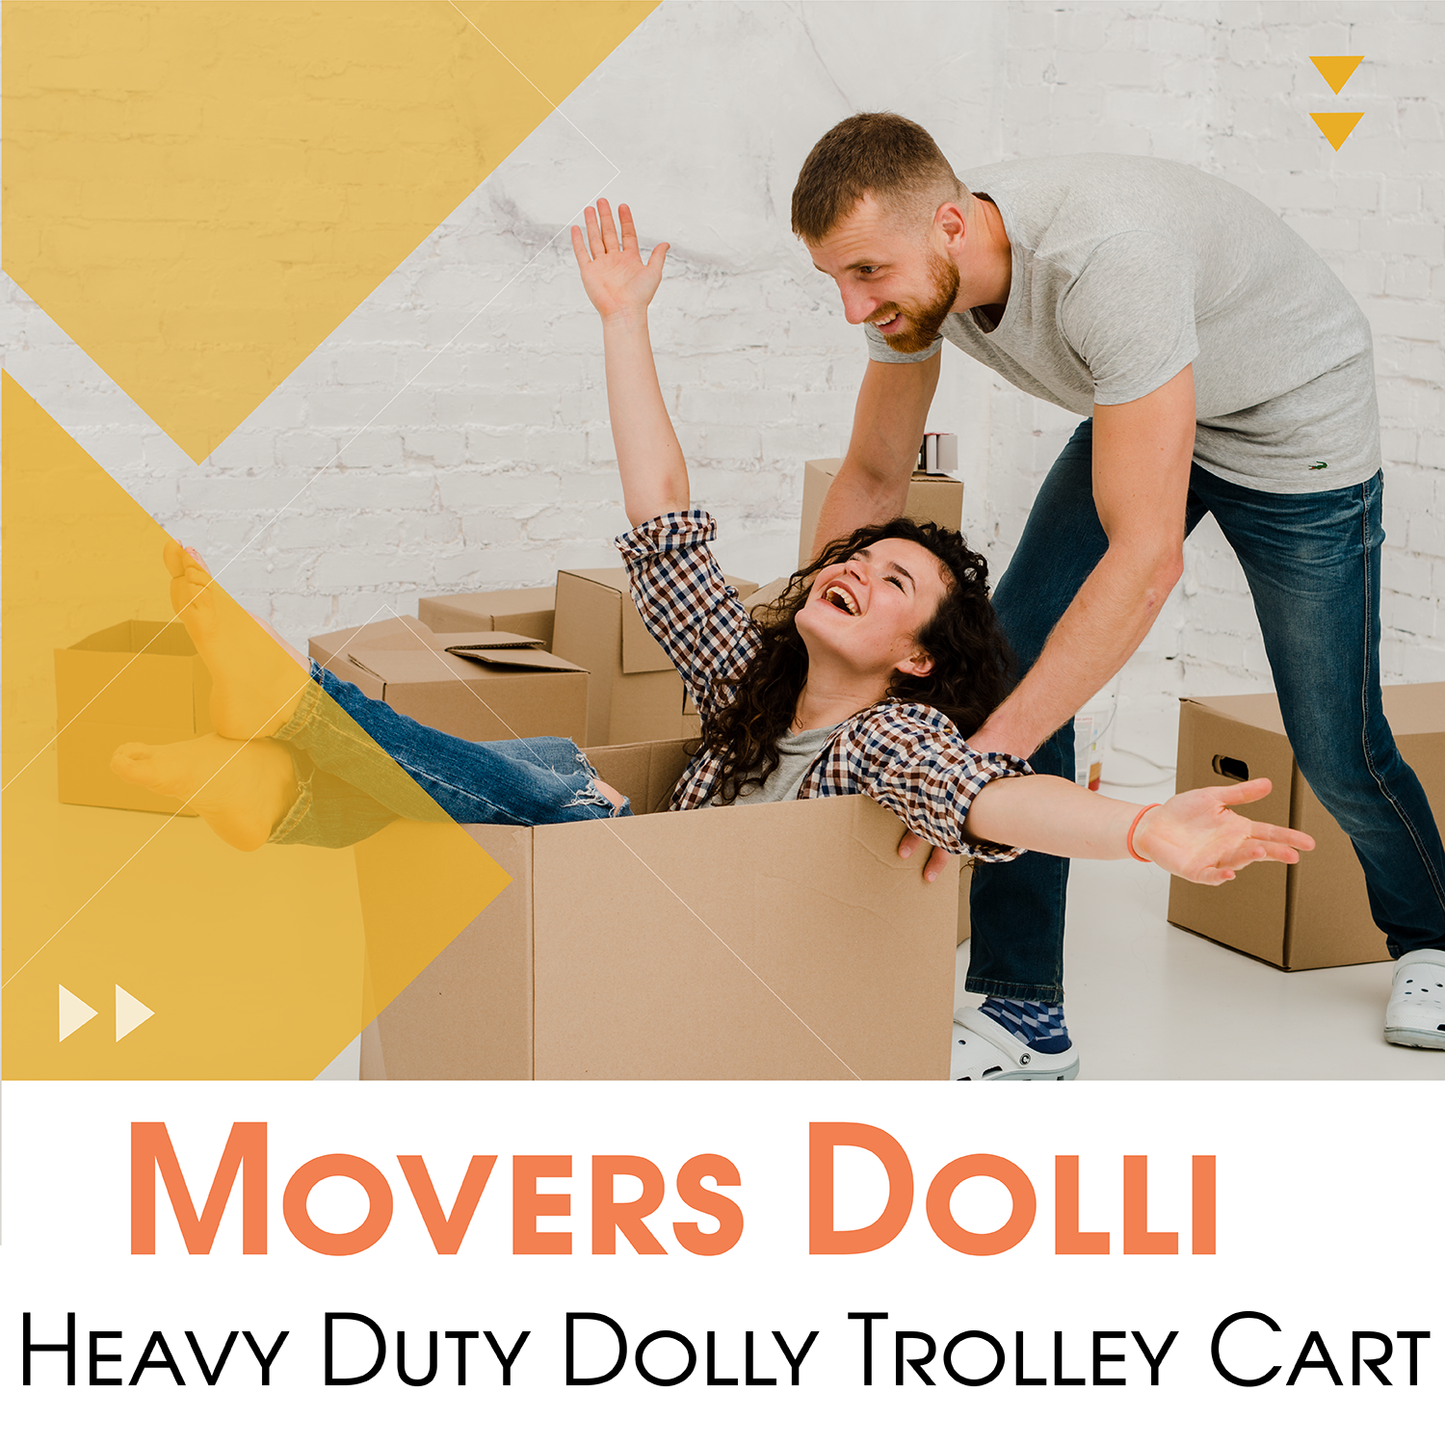 Movers Dolly 18''x12'' Aluminum Frame with 3'' TPU Casters with Brake Option